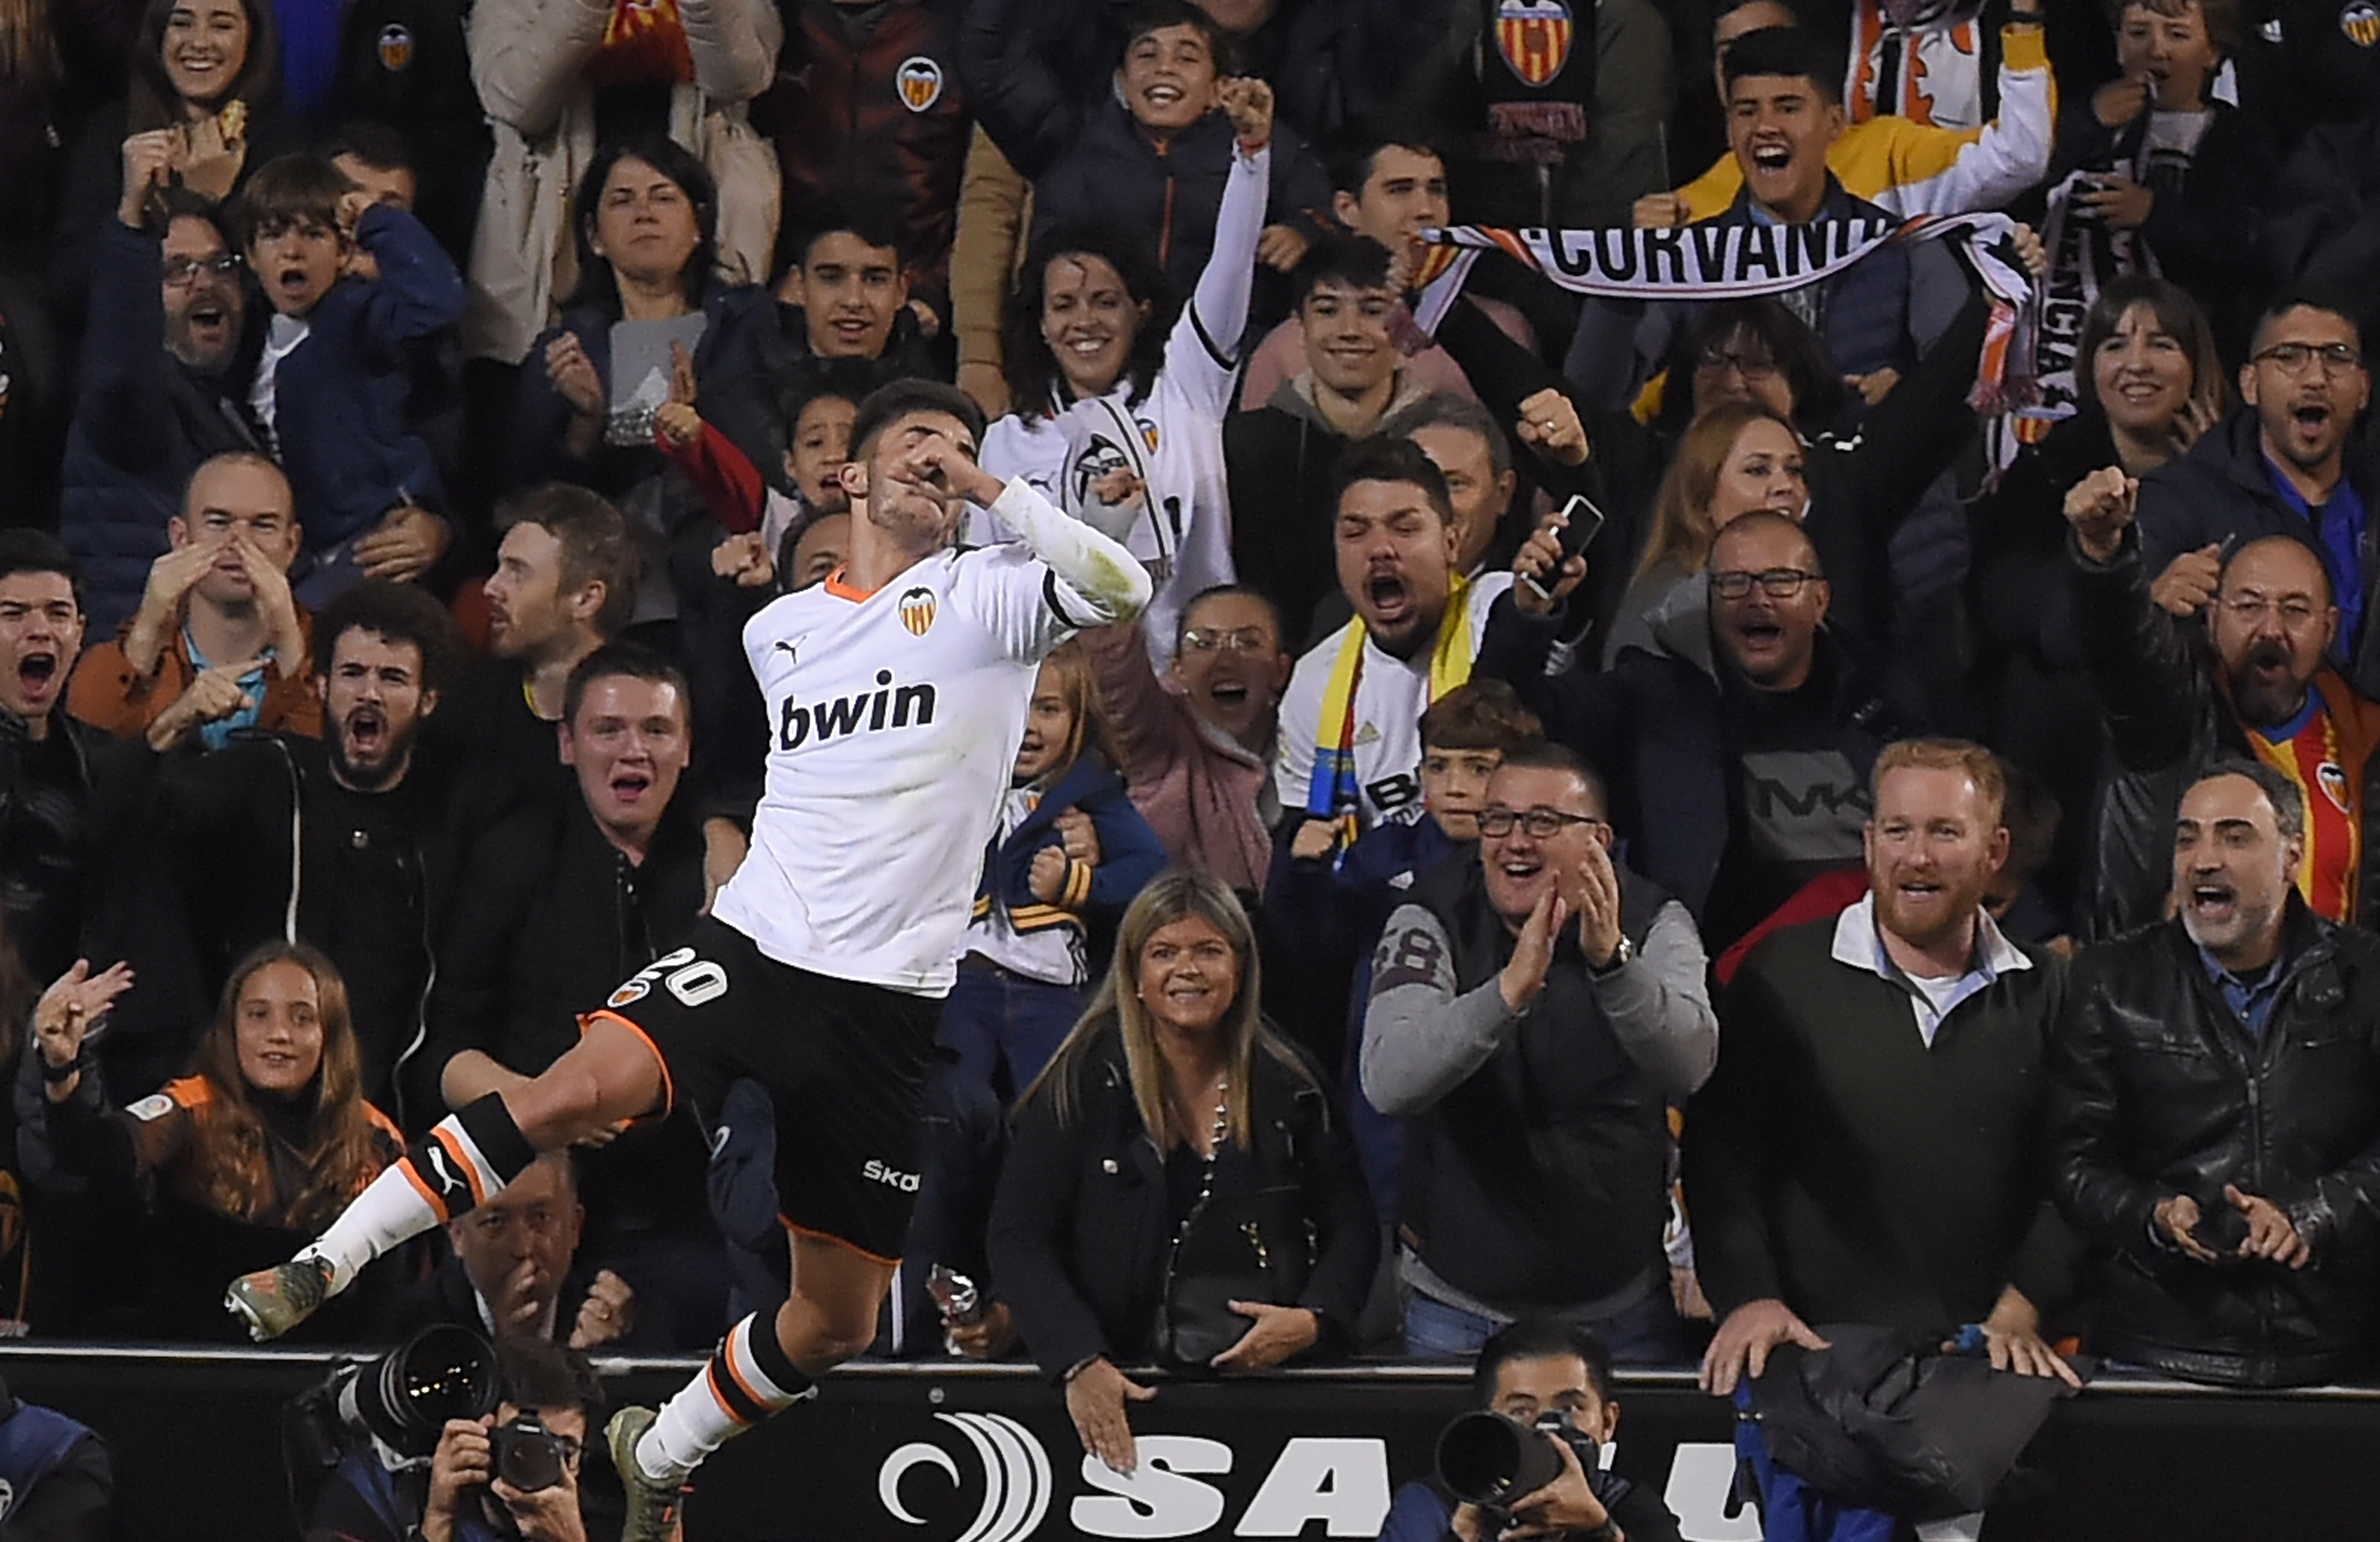 Valencia's Spanish midfielder Ferran Torres celebrates after scoring during the Spanish league football match between Valencia CF and Villarreal CF at the Mestalla stadium in Valencia on November 30, 2019. (Photo by JOSE JORDAN / AFP) (Photo by JOSE JORDAN/AFP via Getty Images)